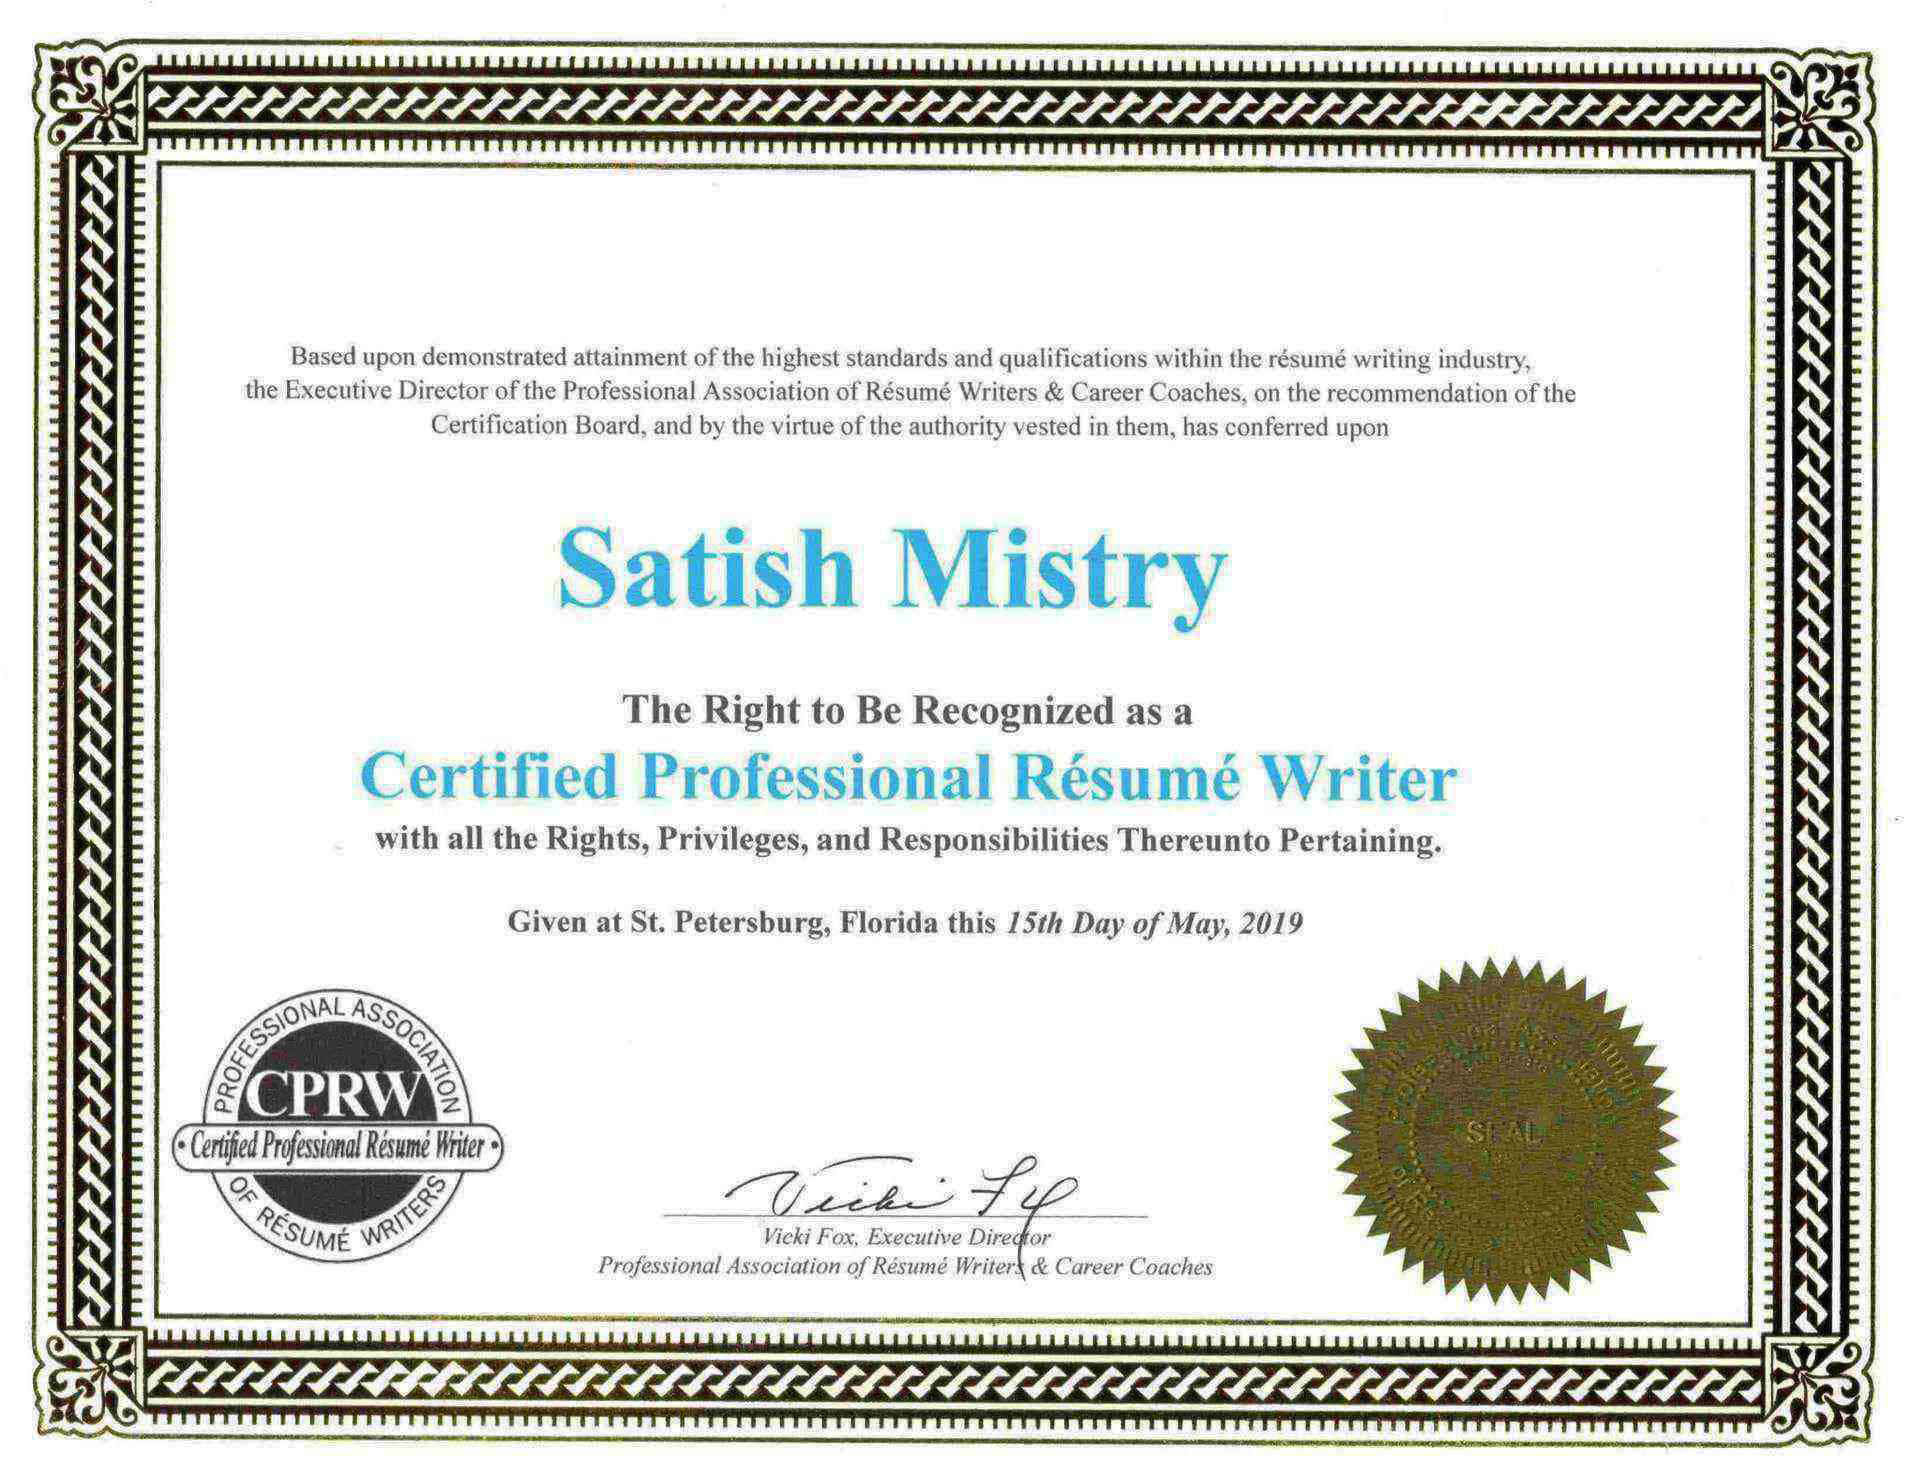 CPRW Certificate Certified Professional Resume Writer